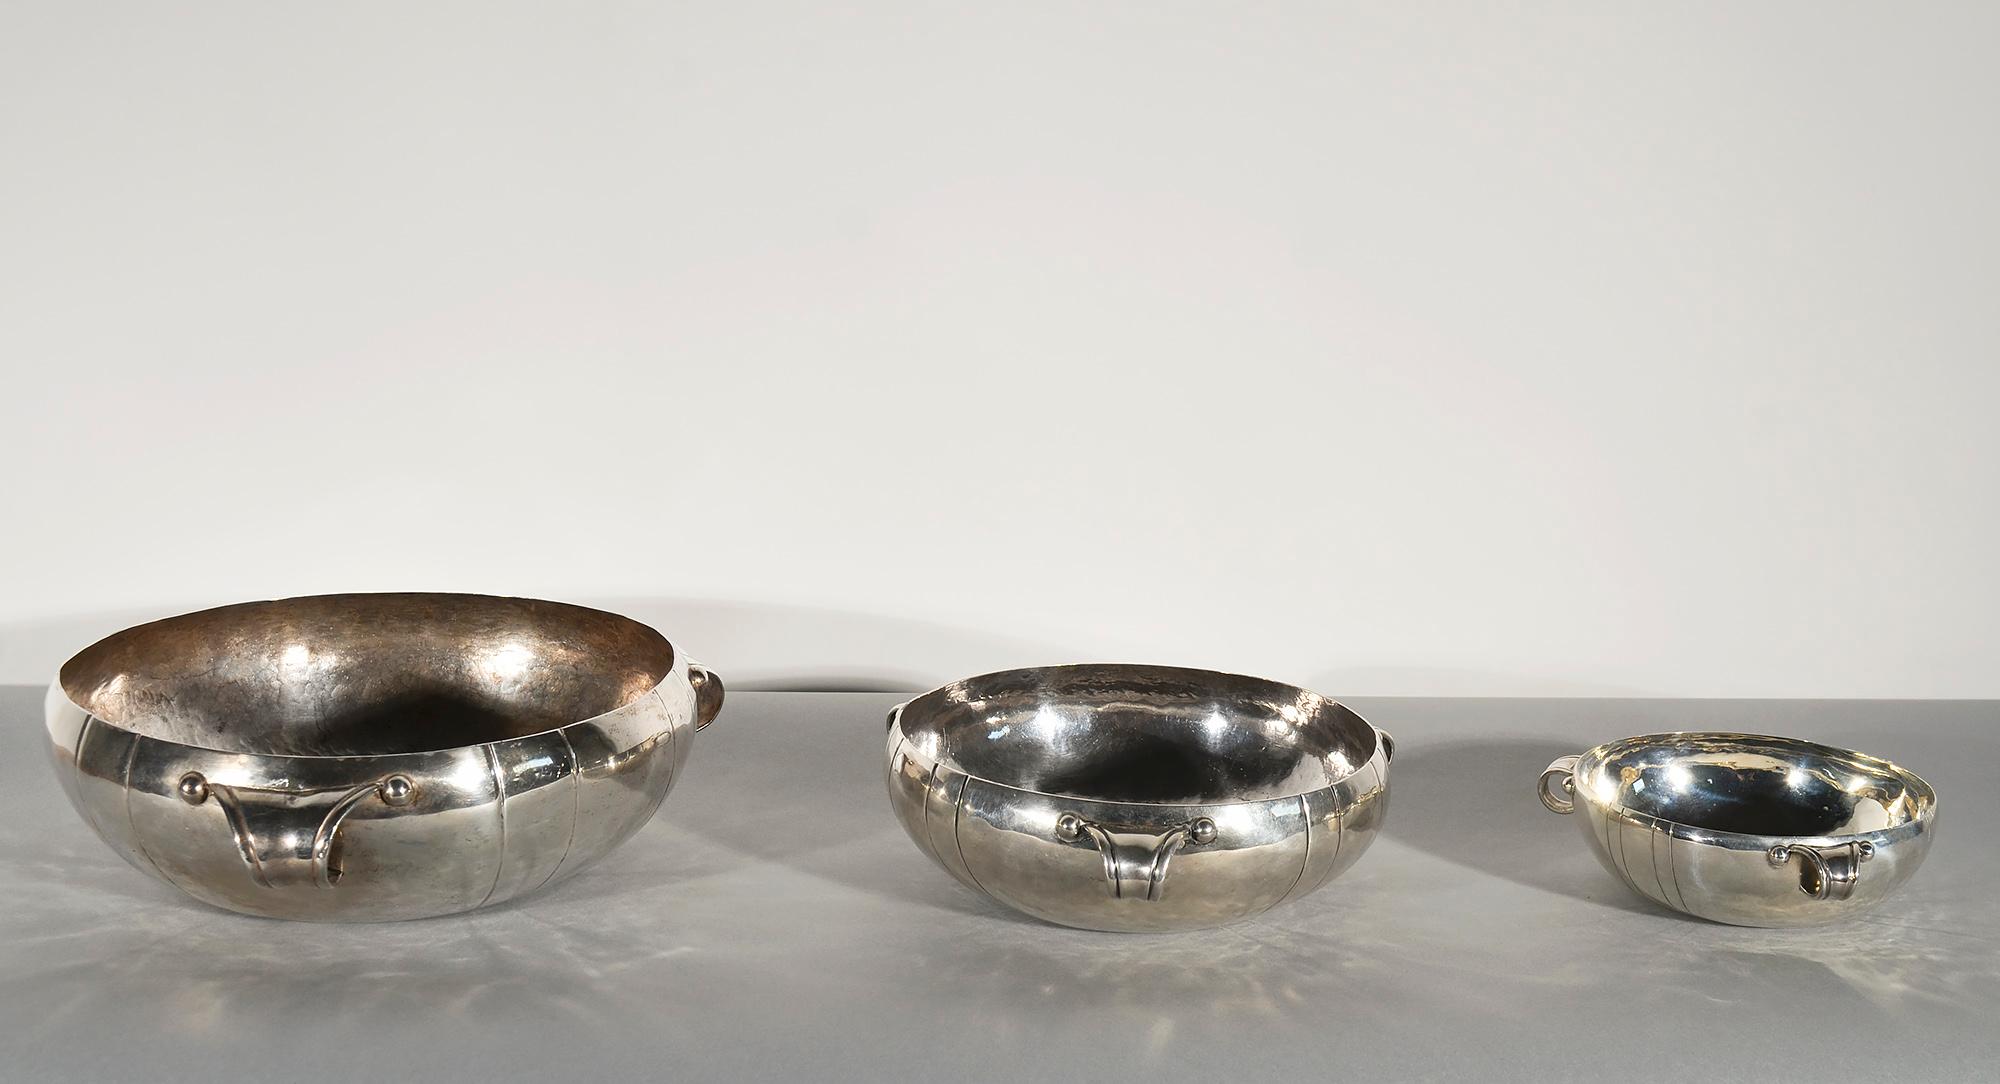 Set of three graduated bowls by silver master, William Spratling. Each bowl has three handles and a linear scored design between the handles.
The smallest of the bowls has an interior diameter of 5 3/4